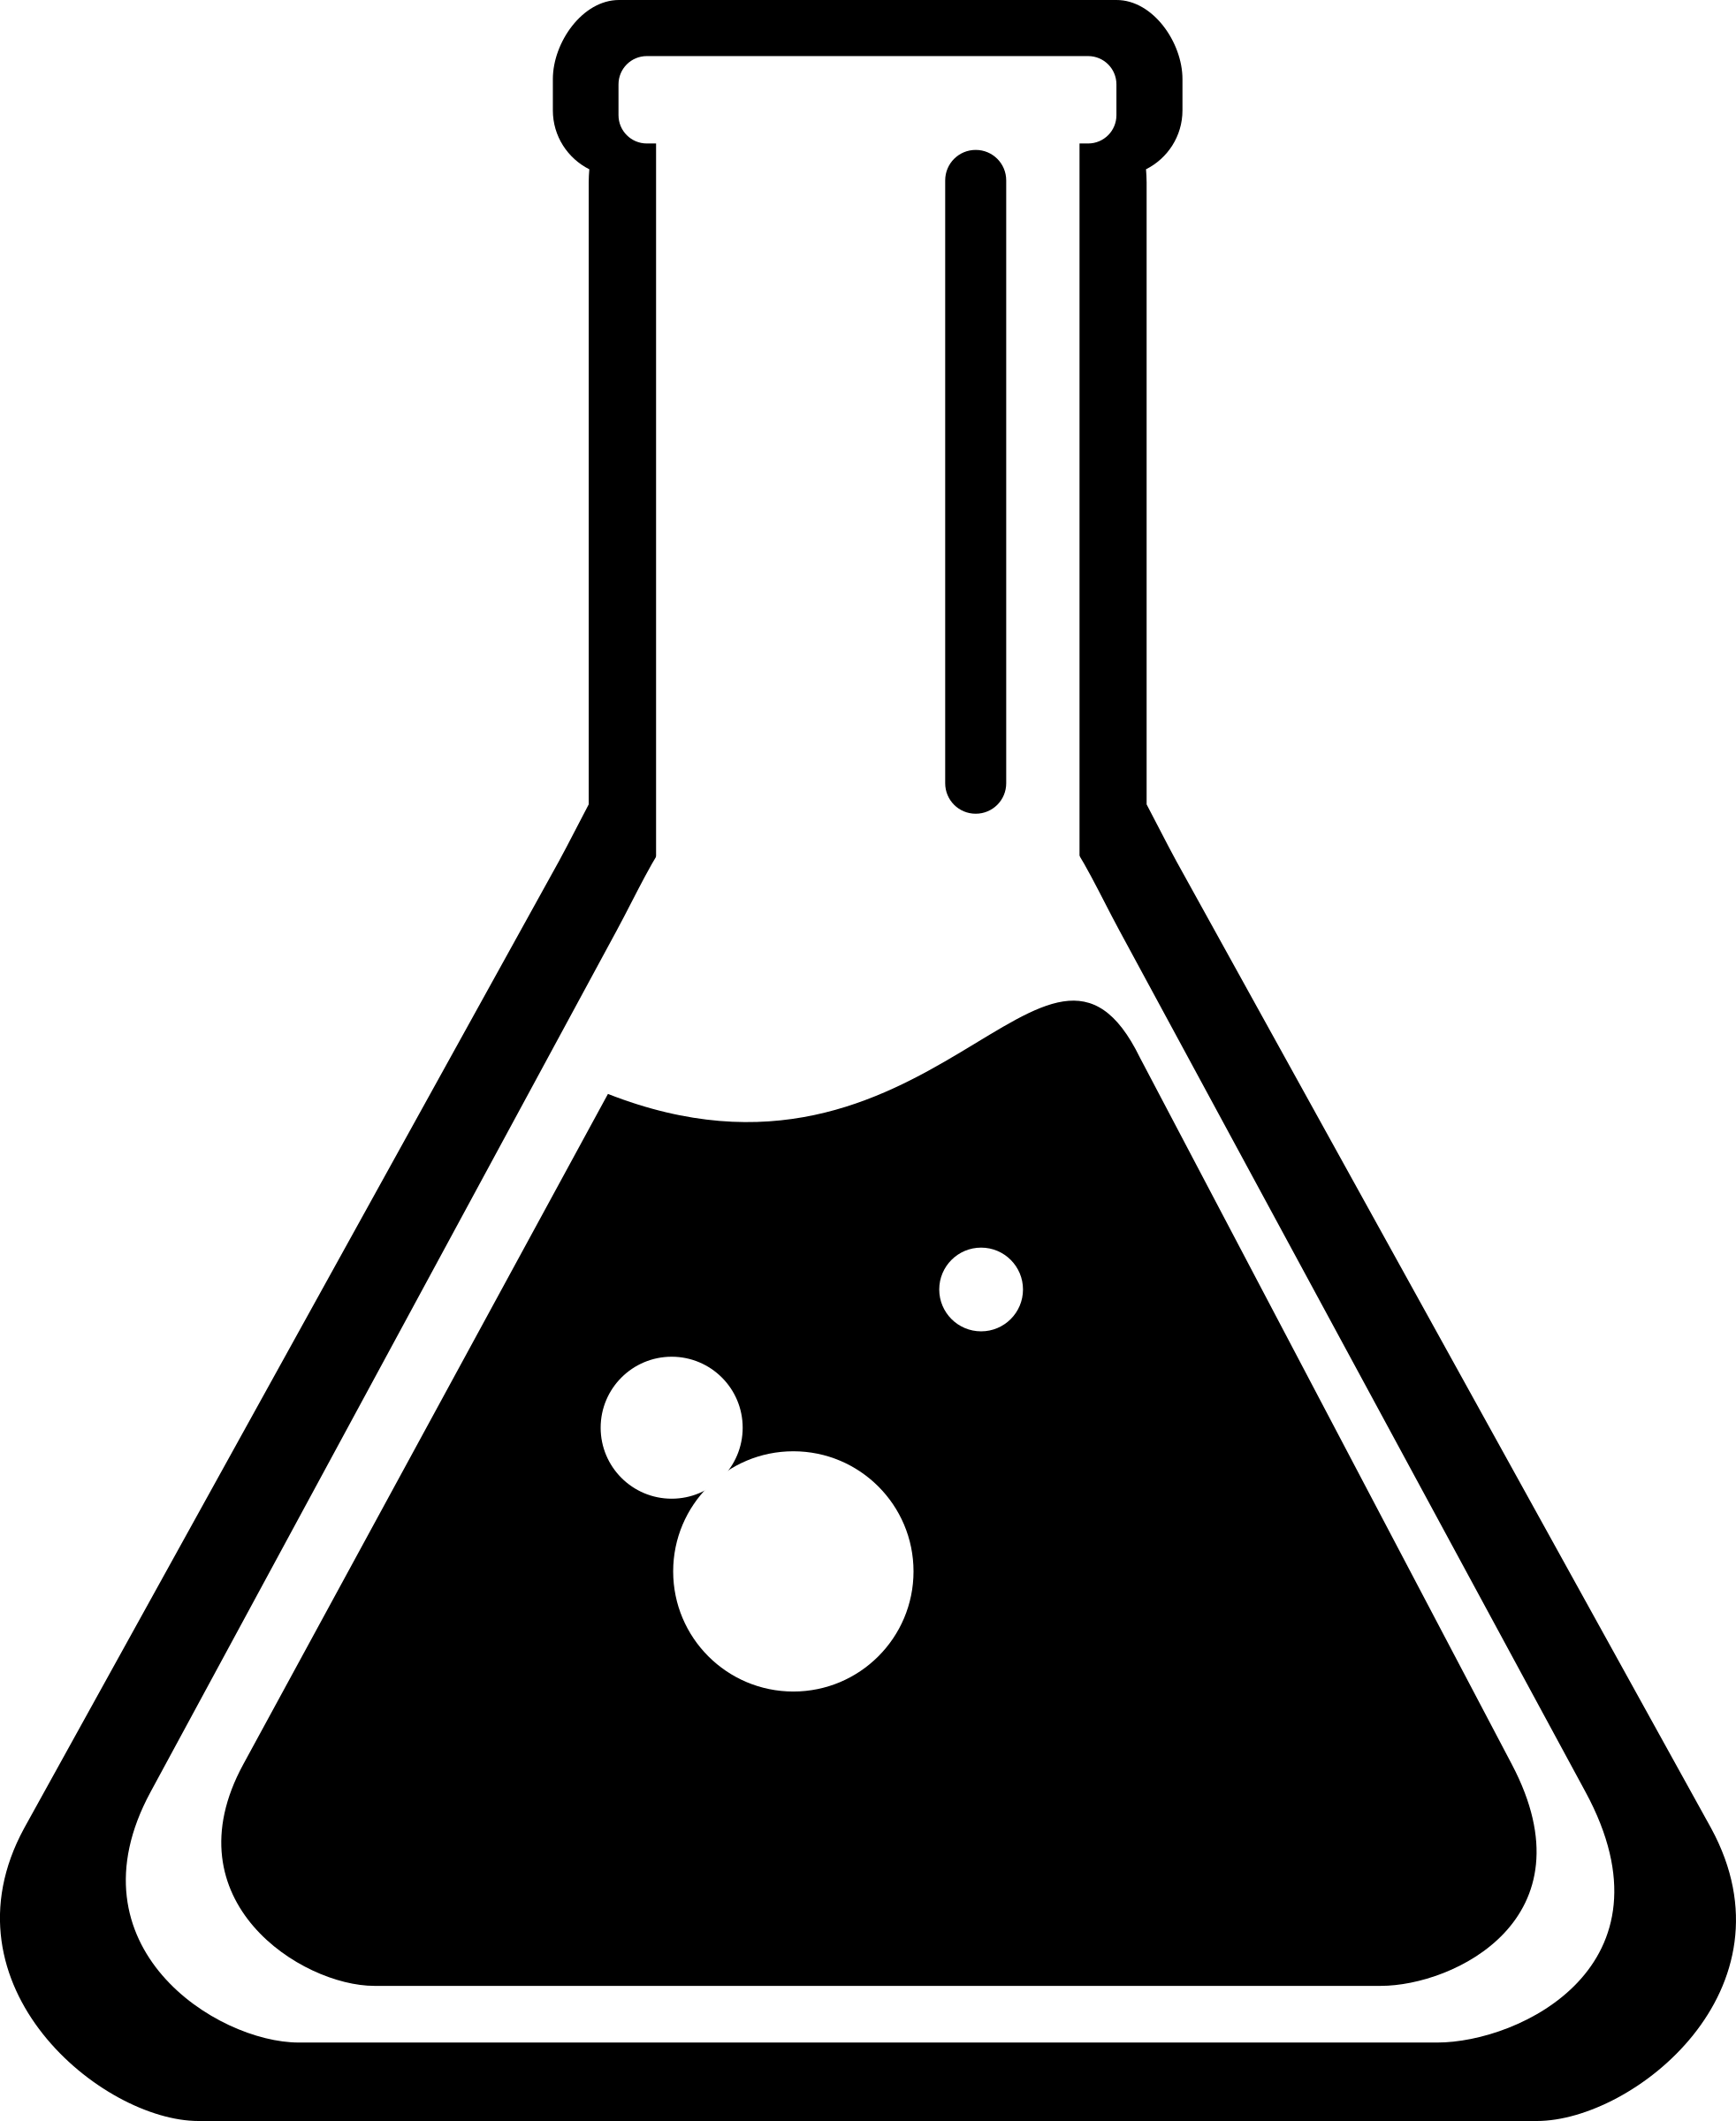 Science by minduka work. Worry clipart test tube